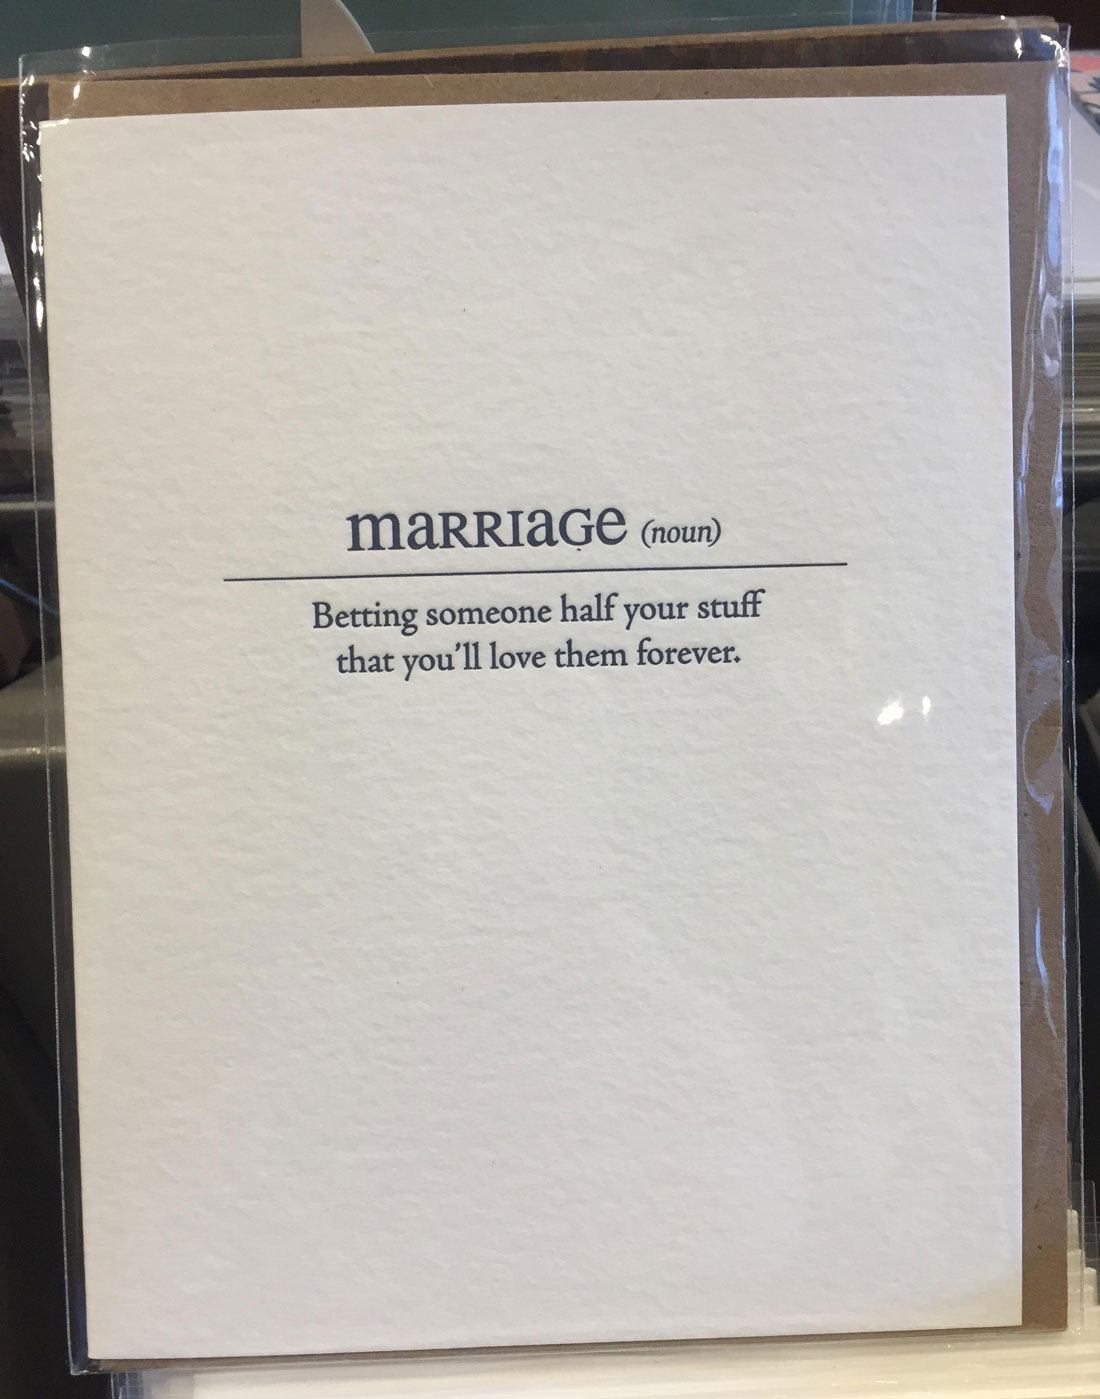 Definition of marriage